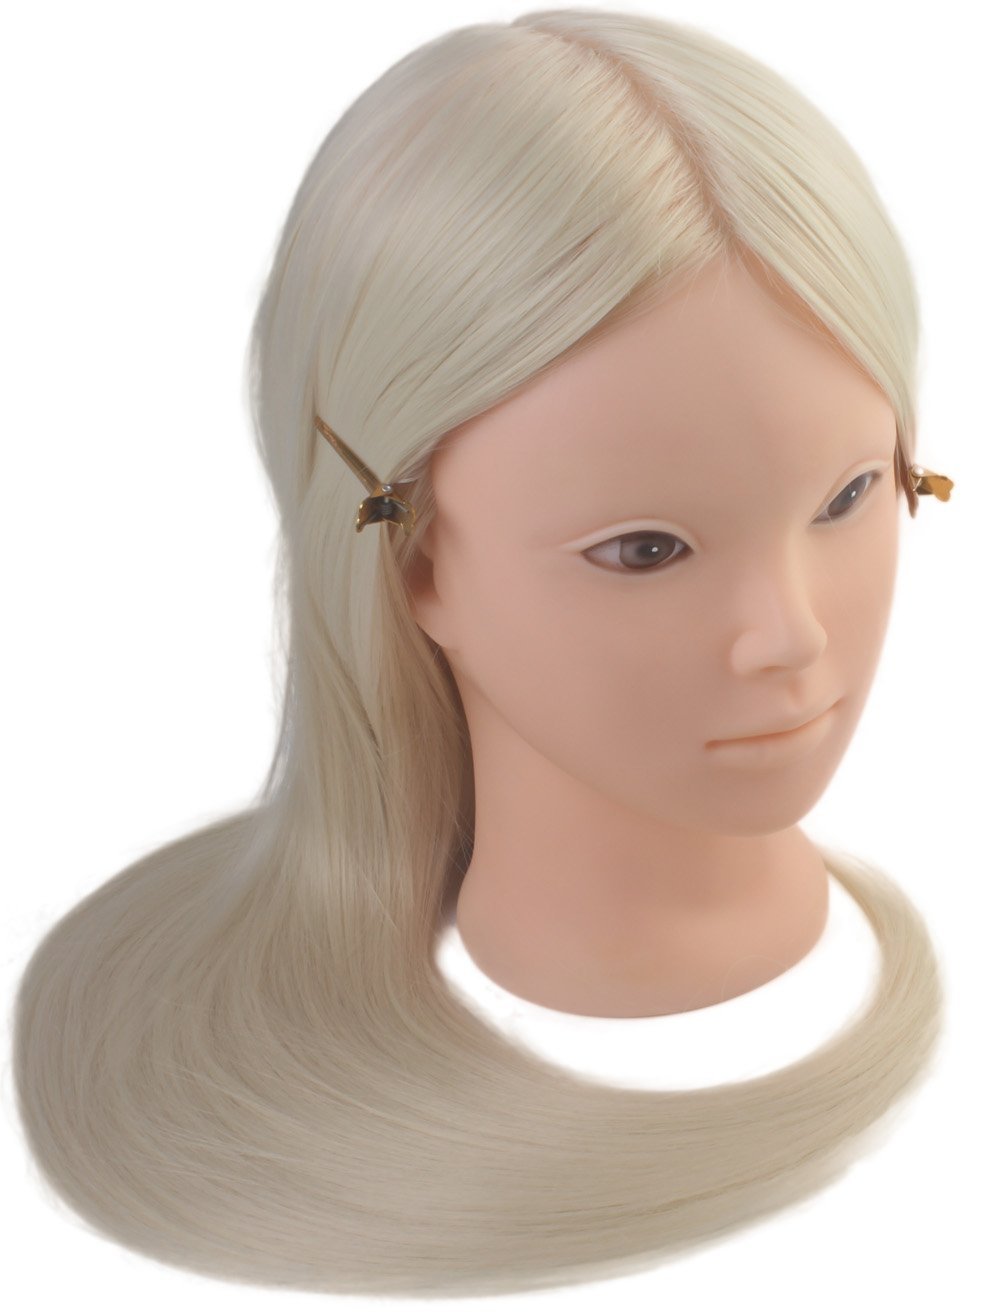 Mannequin Doll Head with Synthetic Hair, For Practice & Training